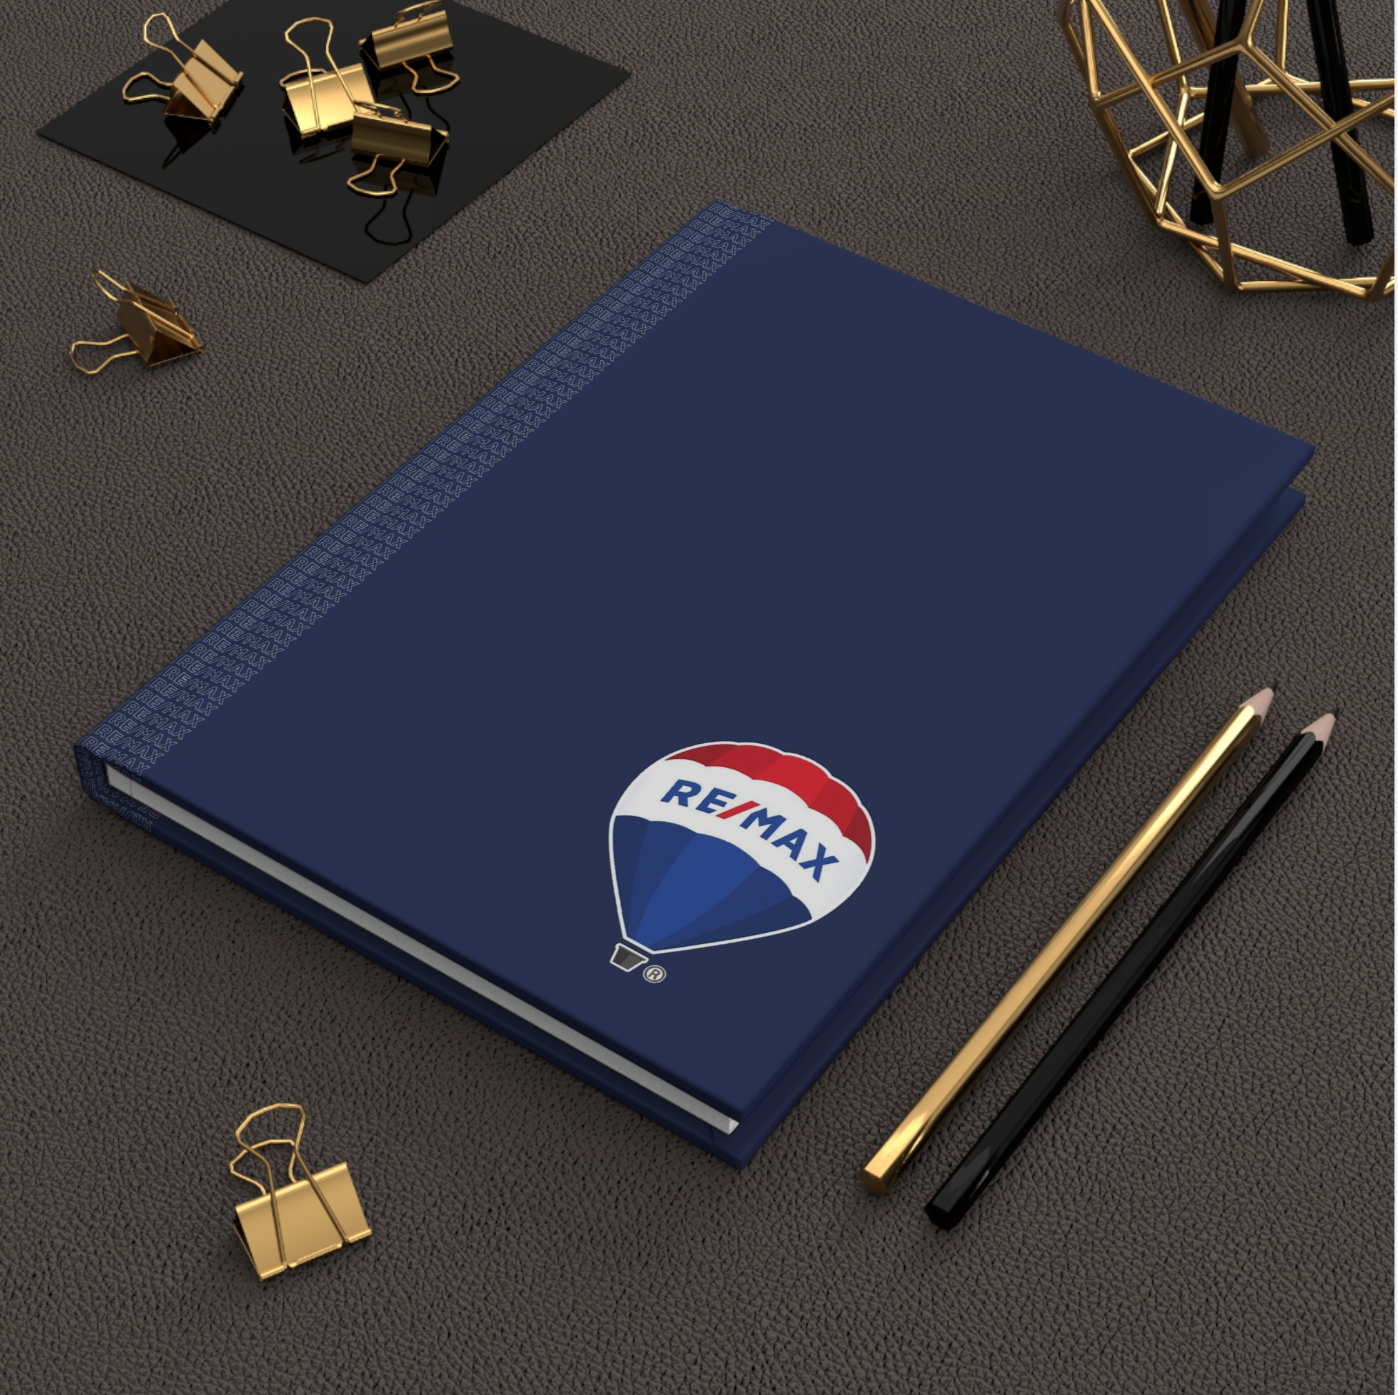 RE/MAX Full Color Hardcover Binders Blue Monogram (from as low as $10.46 per cover)